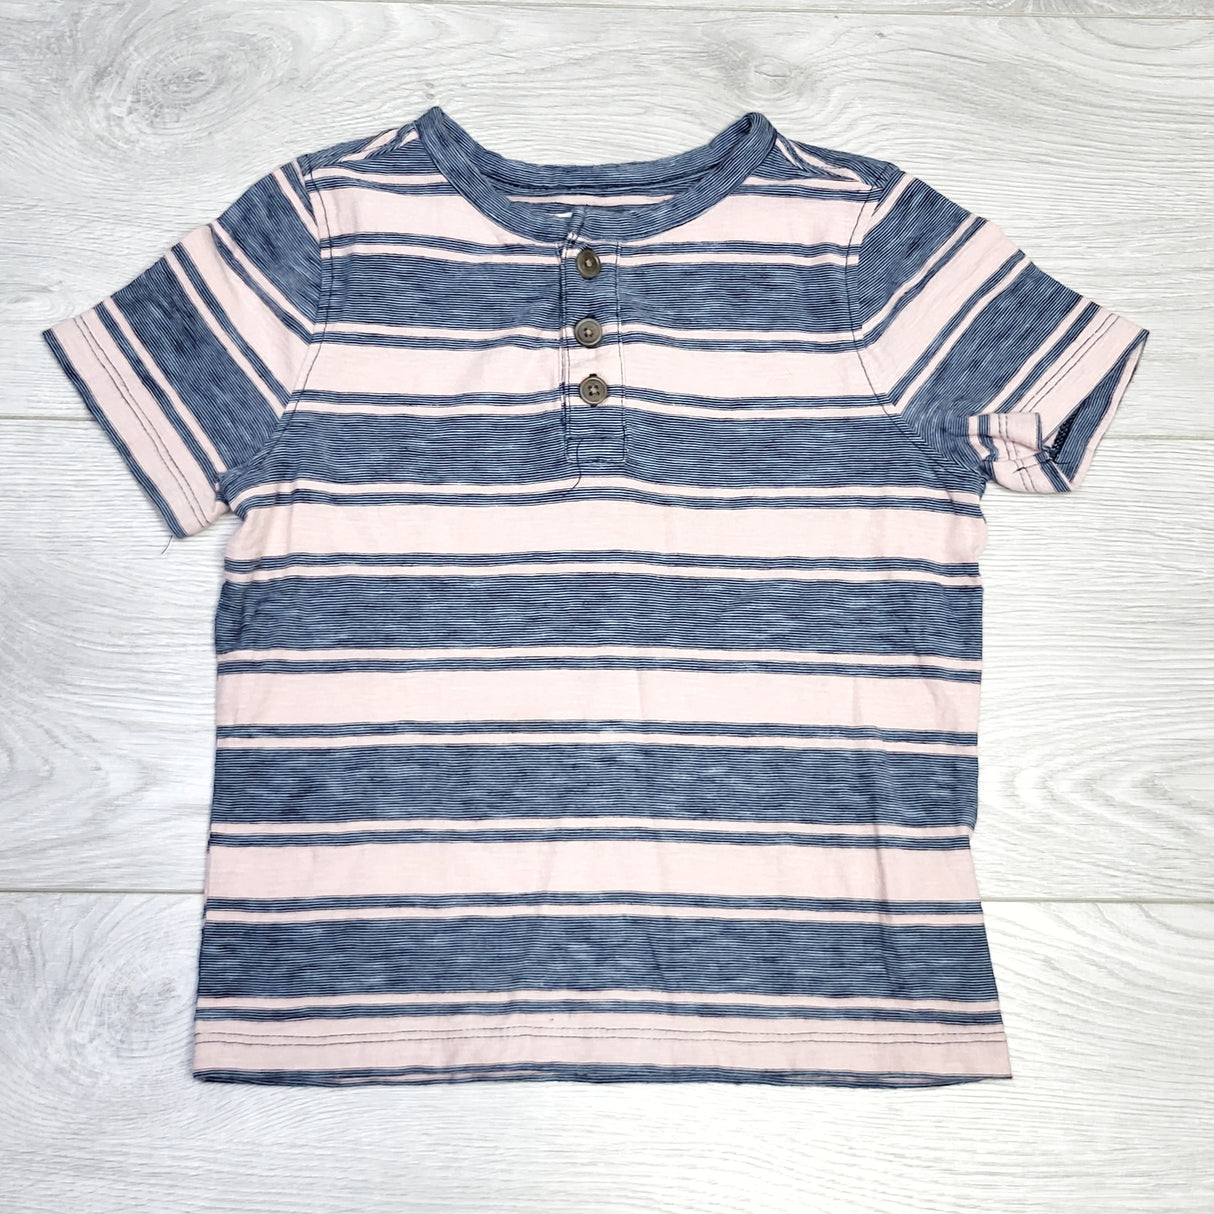 MSNDS11 - Old Navy blue and pink striped t-shirt. Size 3T